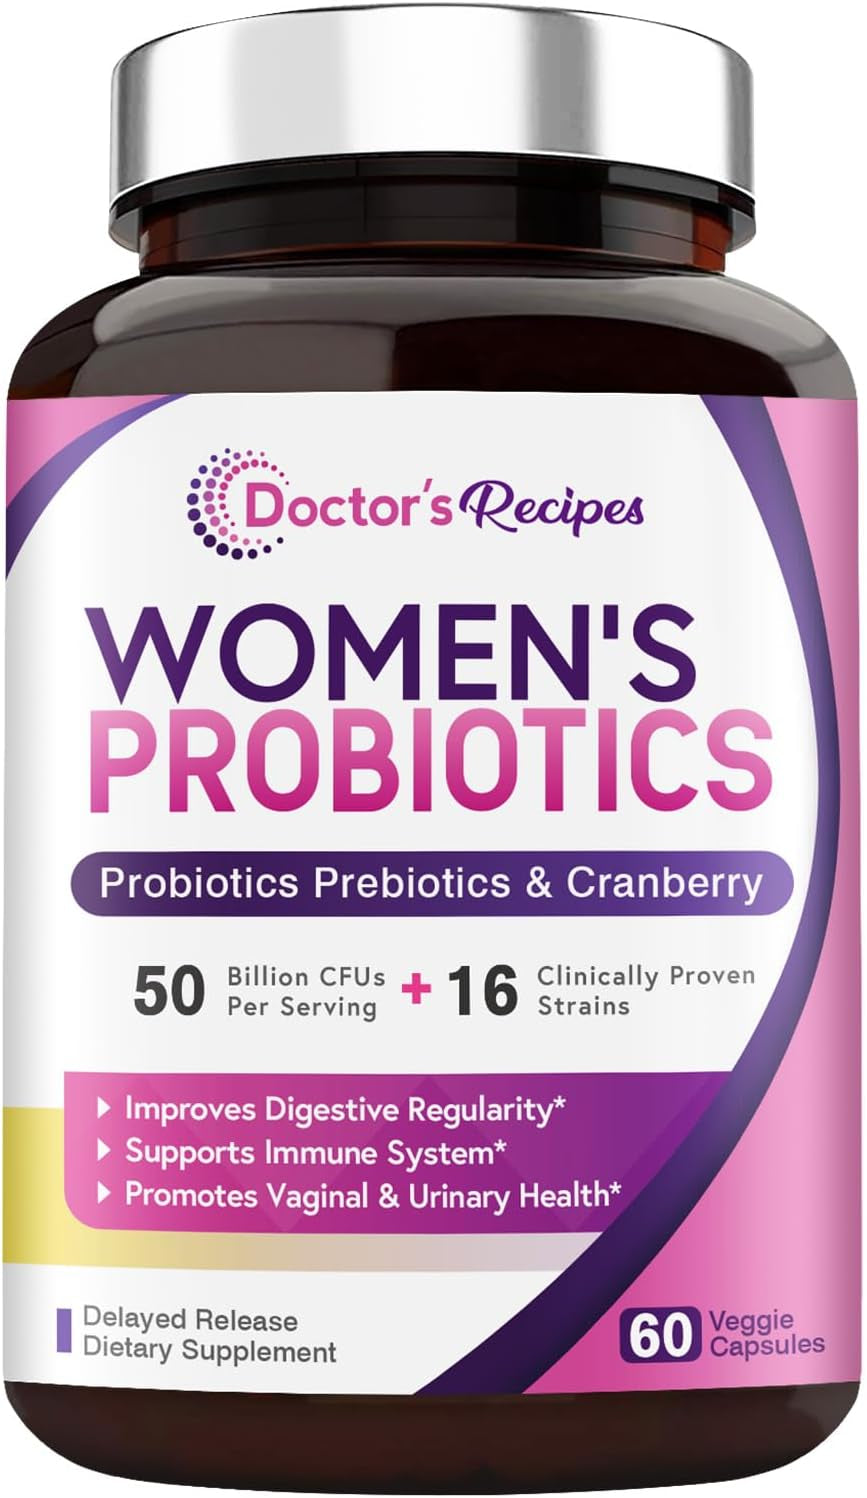 Women's Probiotic with Organic Cranberry - 60 Capsules, 50 Billion CFU, 16 Strains-Digestive Immune Vaginal & Urinary Health, Shelf Stable, Delayed Release, No Soy Gluten Dairy